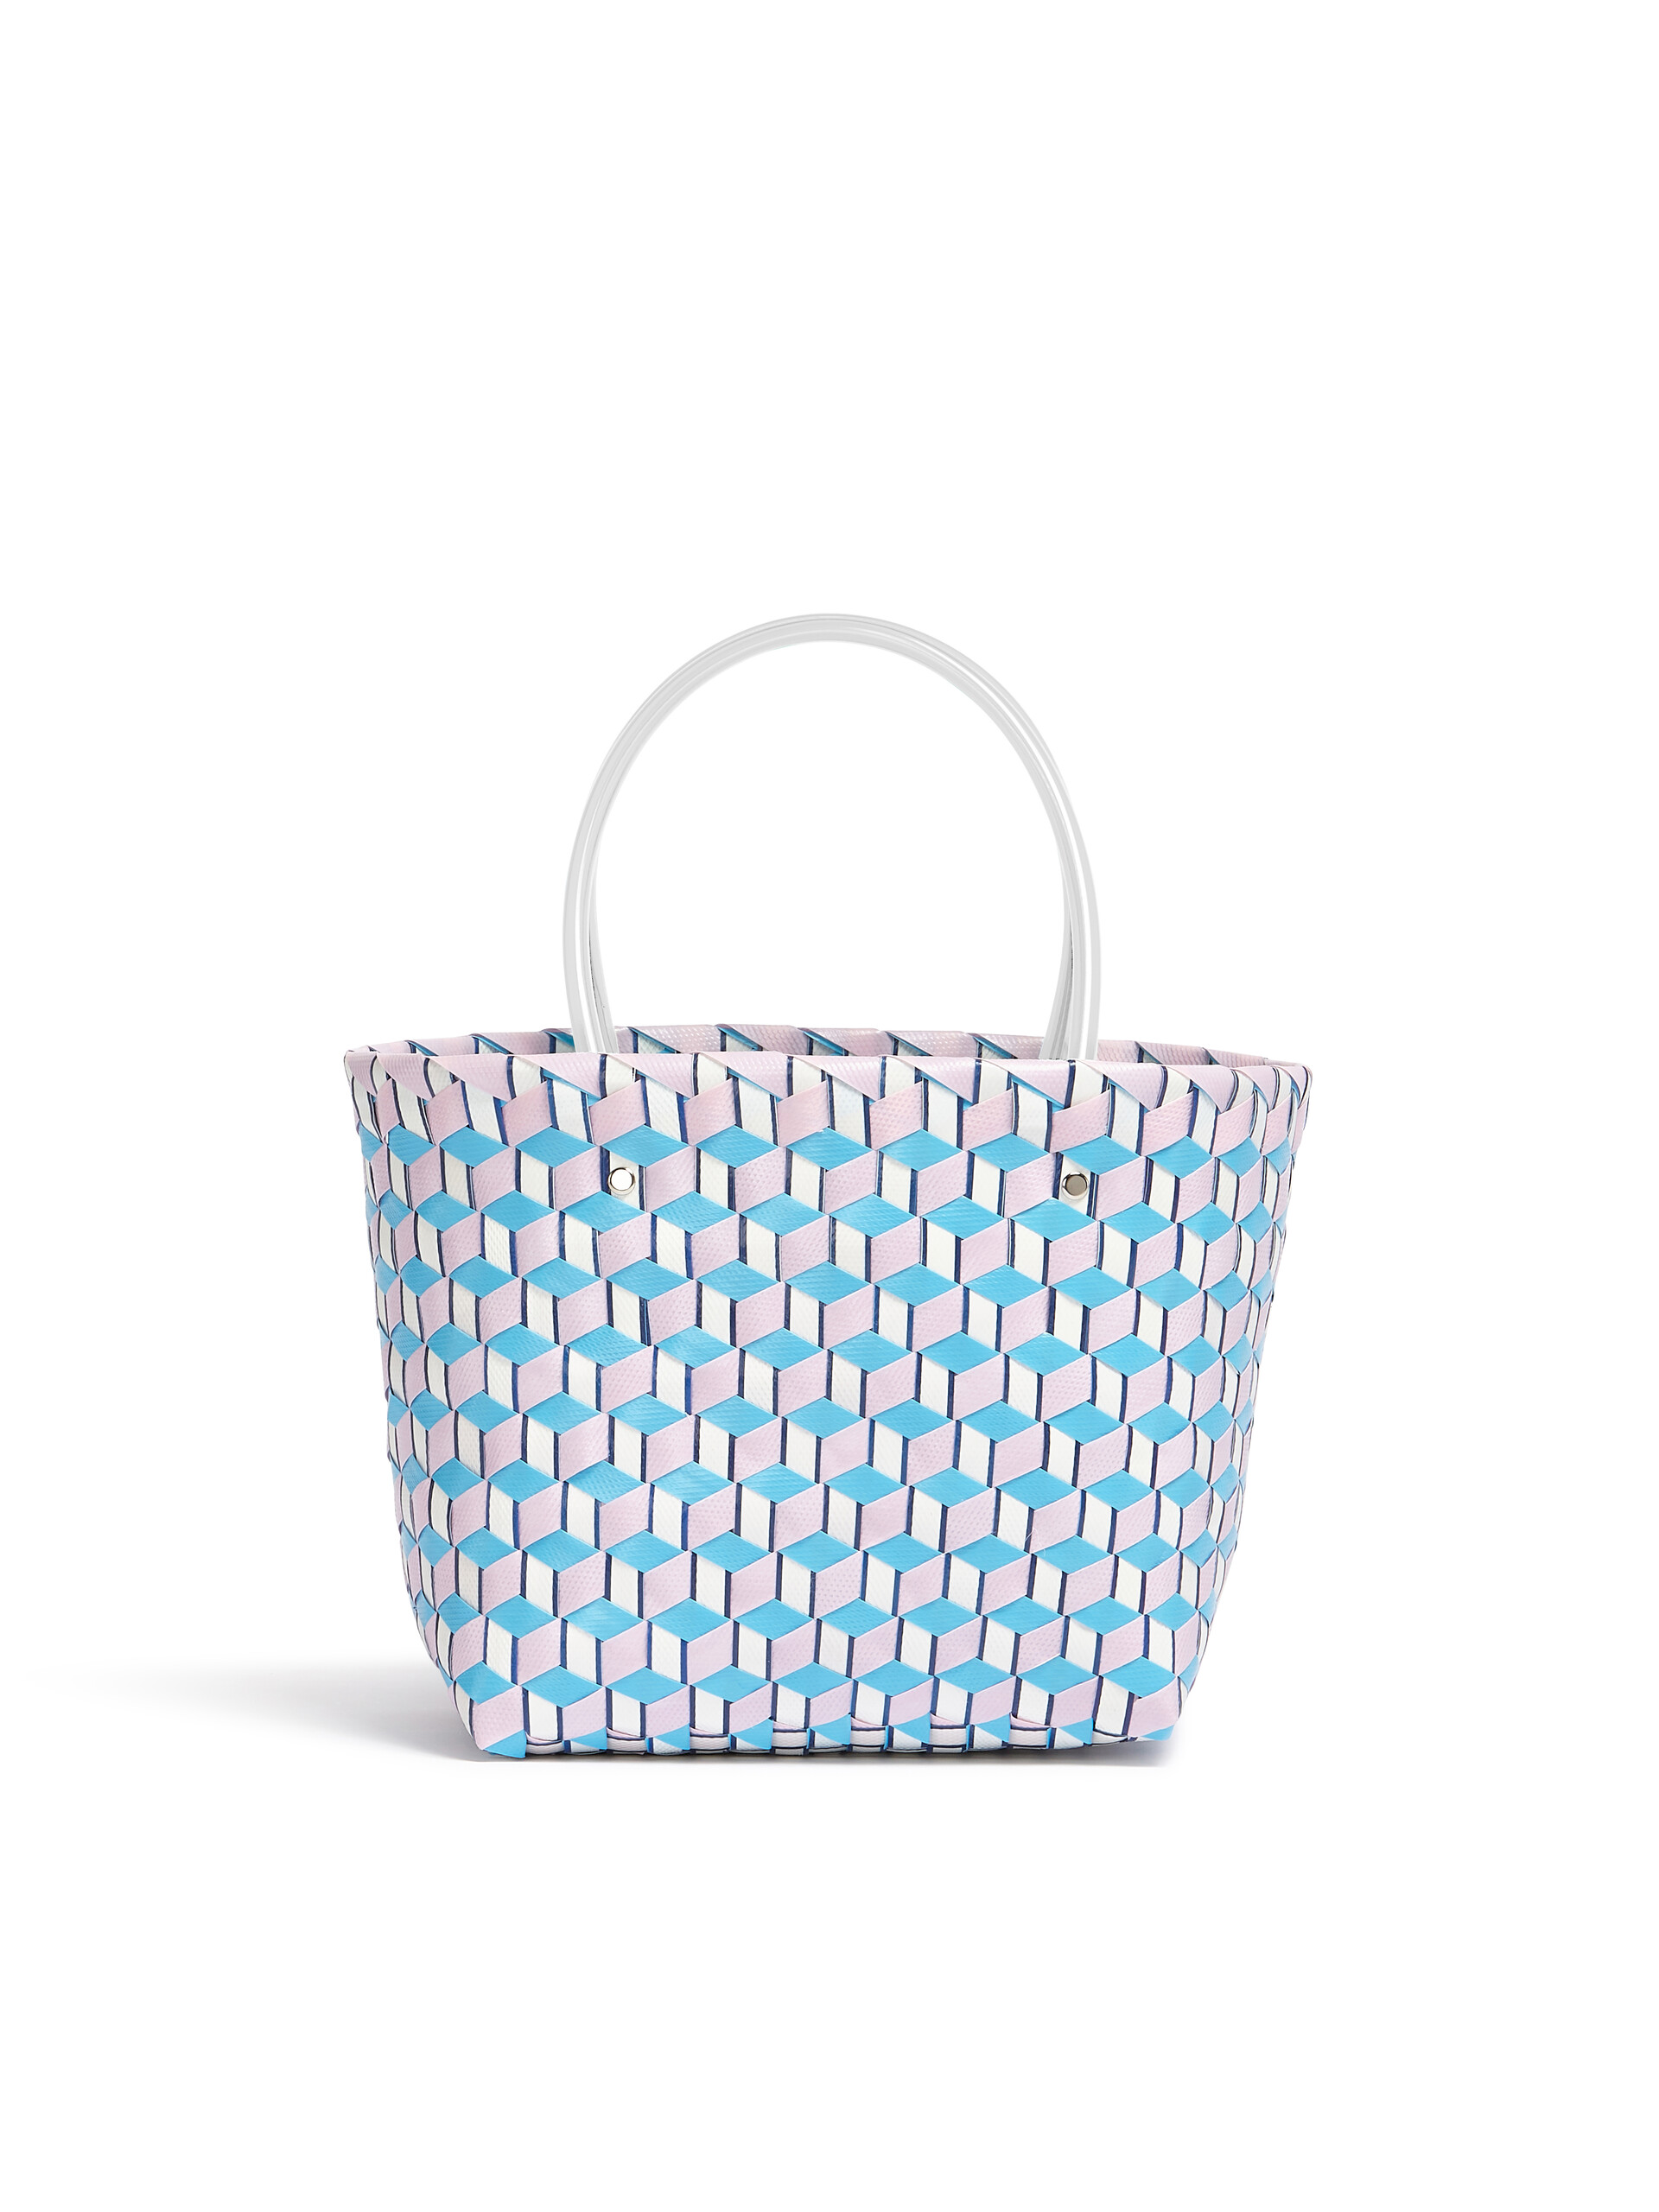 MARNI MARKET 3D BAG in pale blue cube woven material - Bags - Image 3